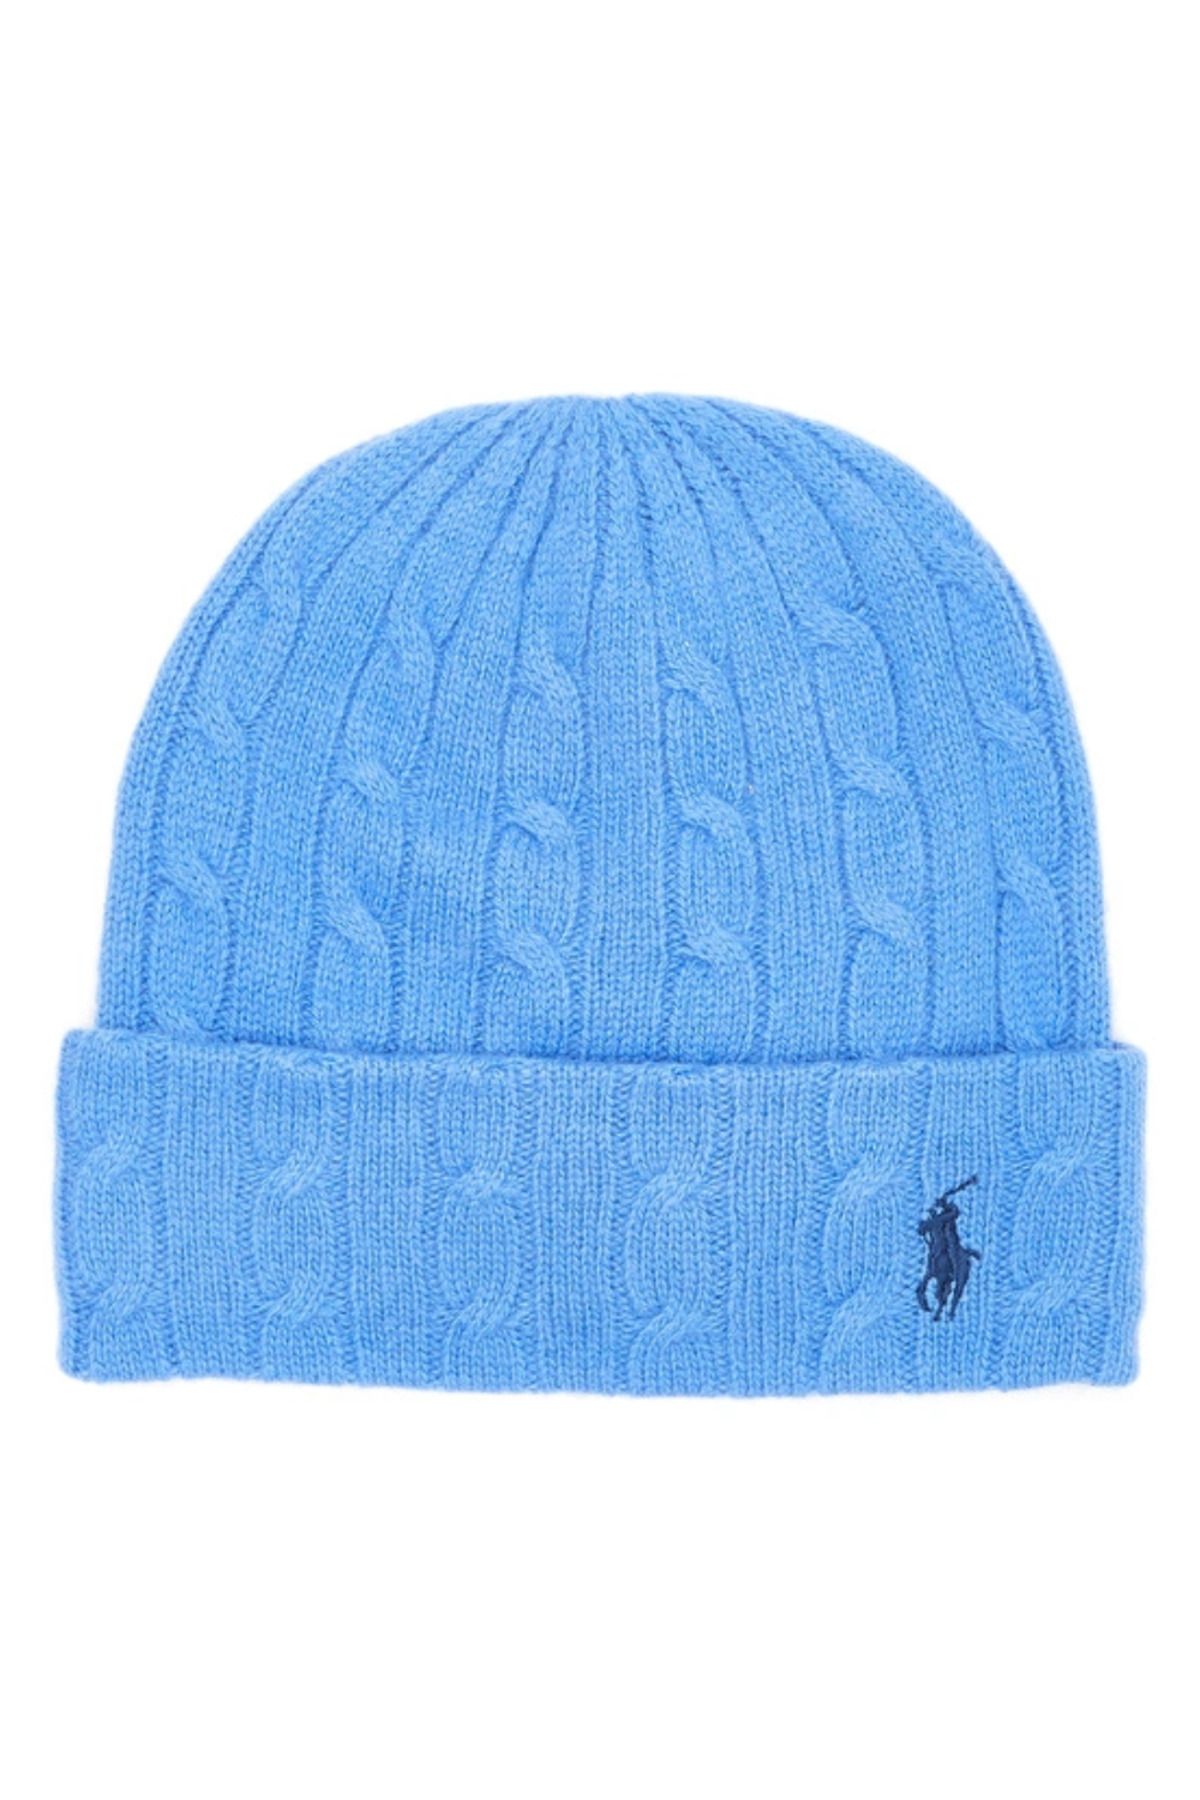 Ralph Lauren Logo Embroidered Wool & Cashmere Cable Beanie